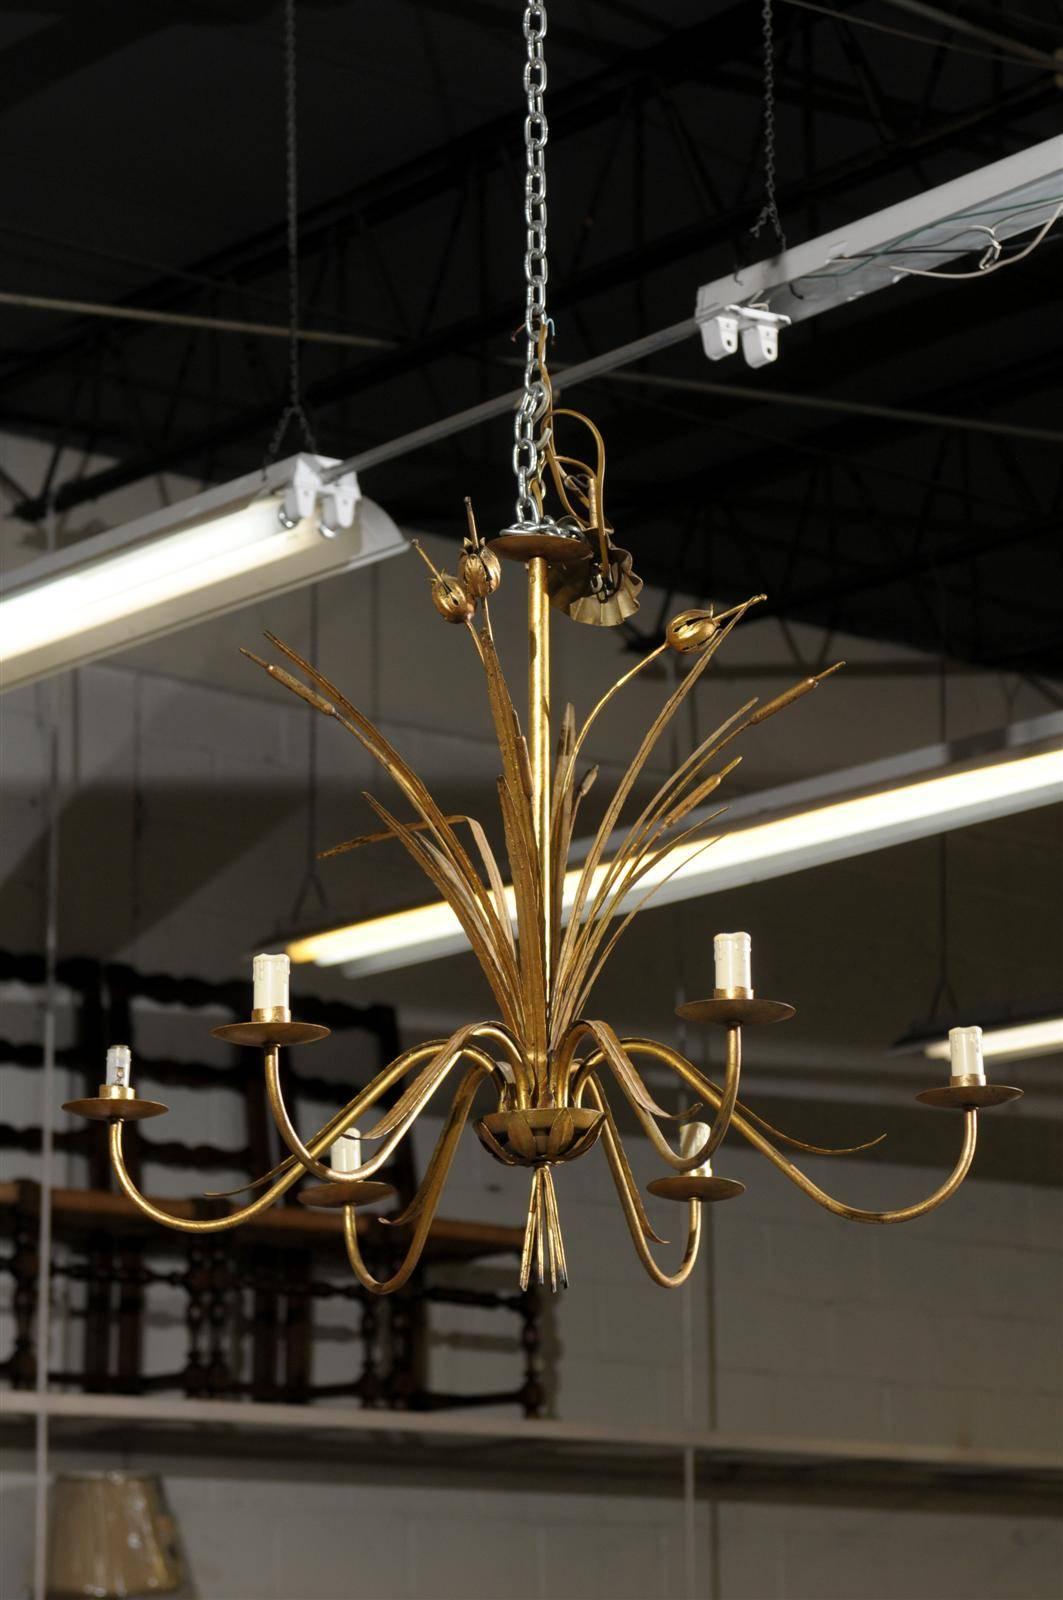 Mid-Century Six Light Gilded Chandelier from France, circa 1950
A light and airy six arm chandelier. The pond fronds and cattails give this chandelier a whimsical character. The price listed is the unwired price. We are in the process of having it